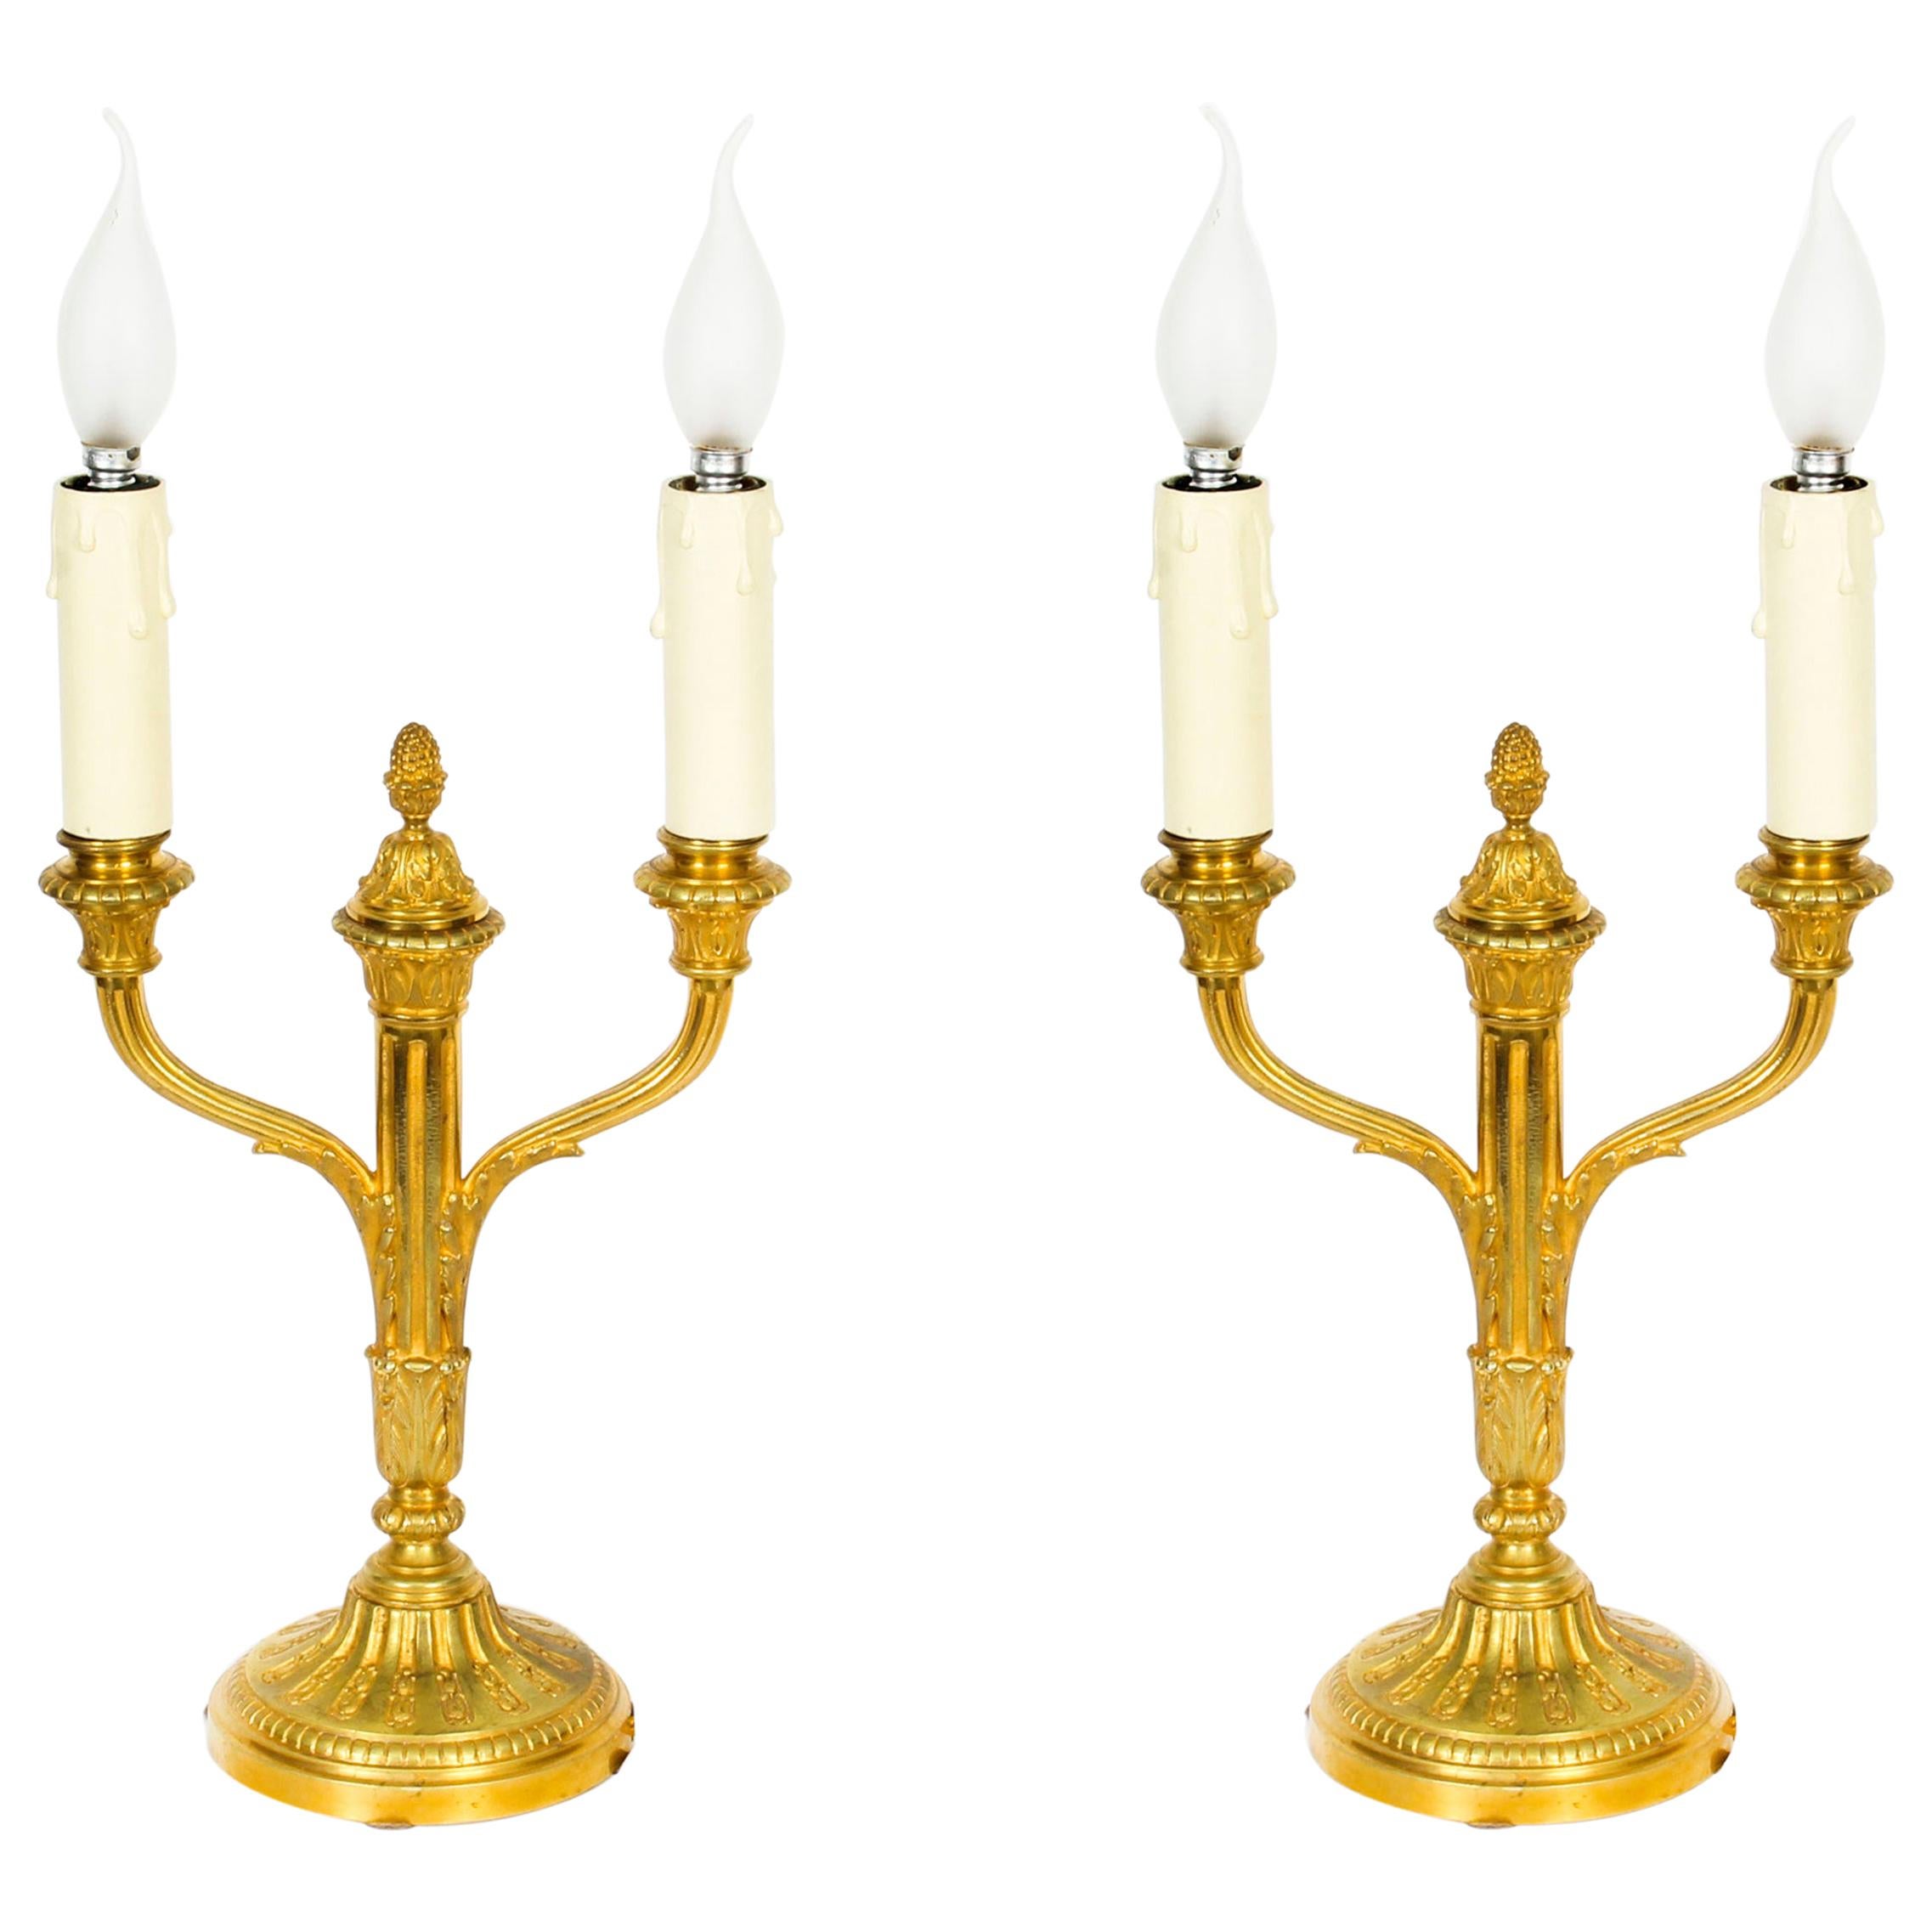 Antique Pair of French Neoclassical Ormolu Candelabra Table Lamps, 19th Century